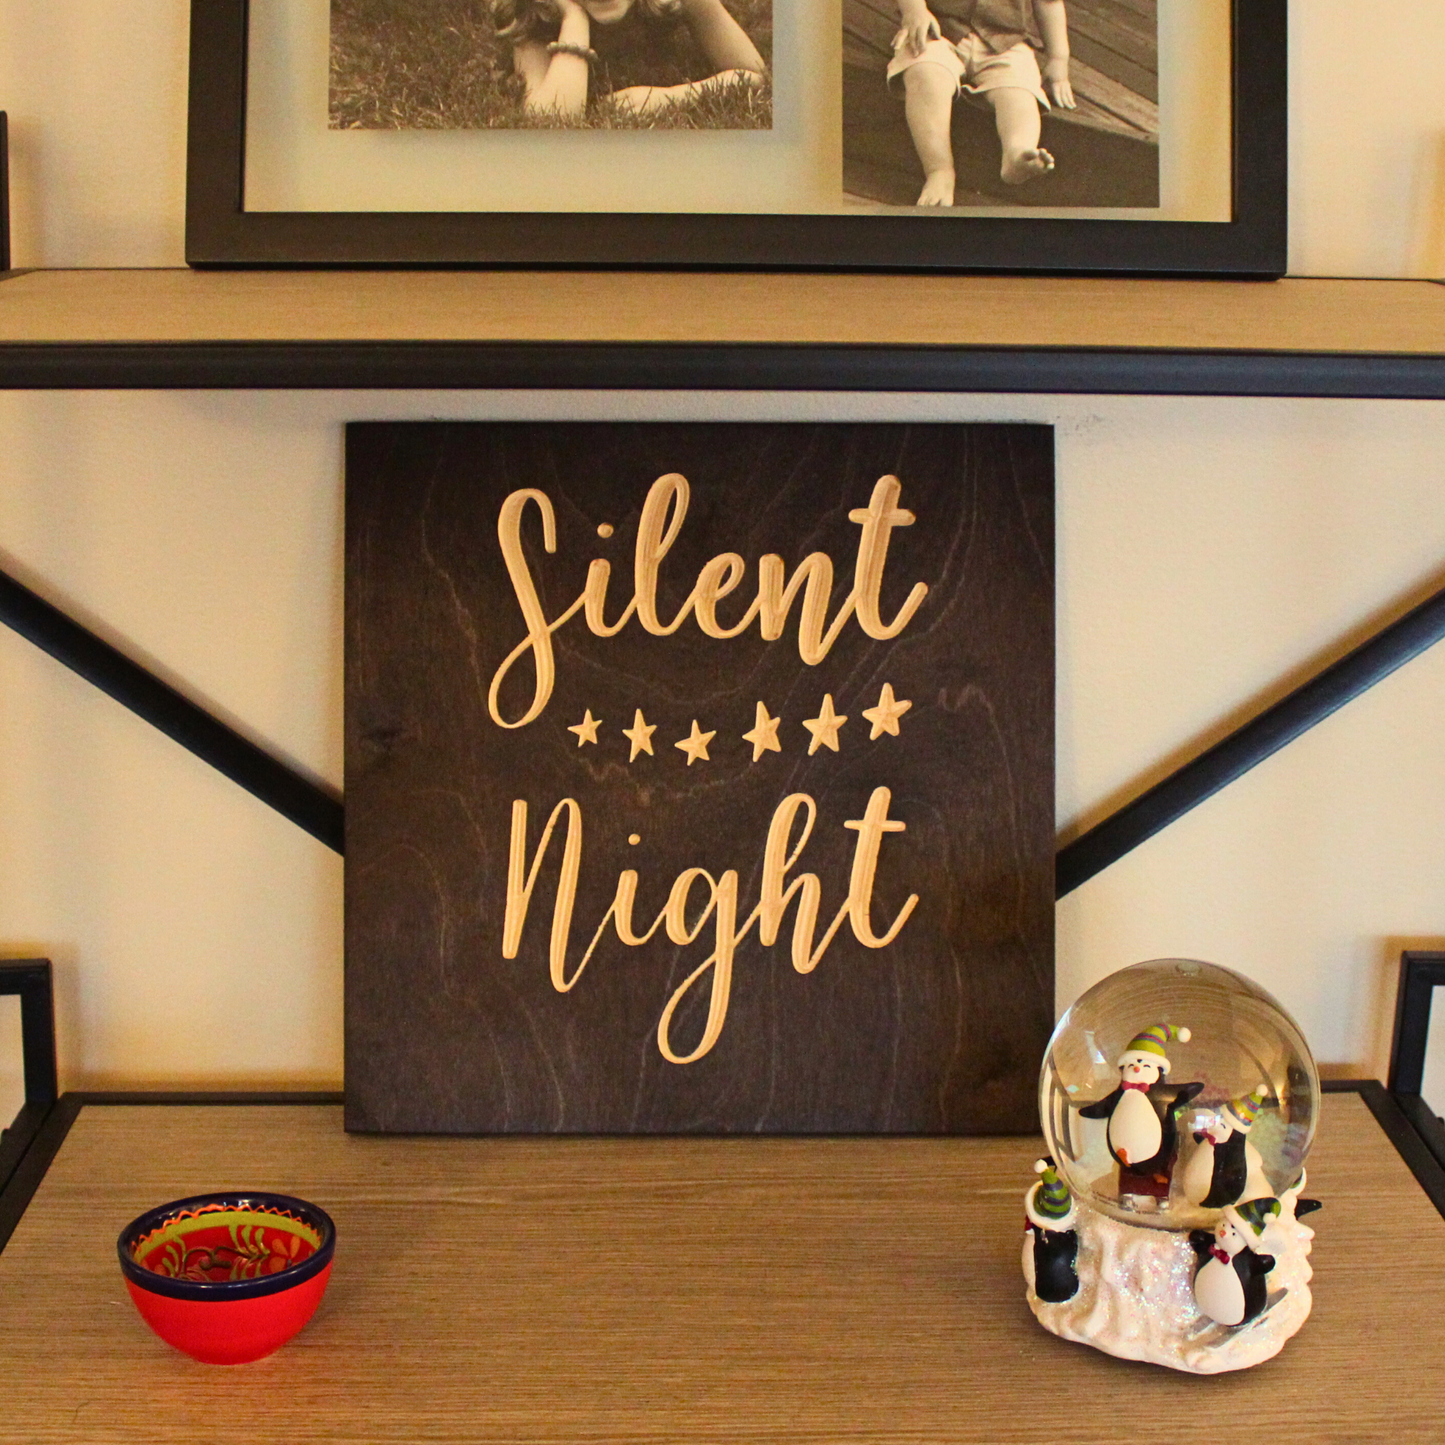 Silent Night Carved Wooden Sign on Holiday Shelf